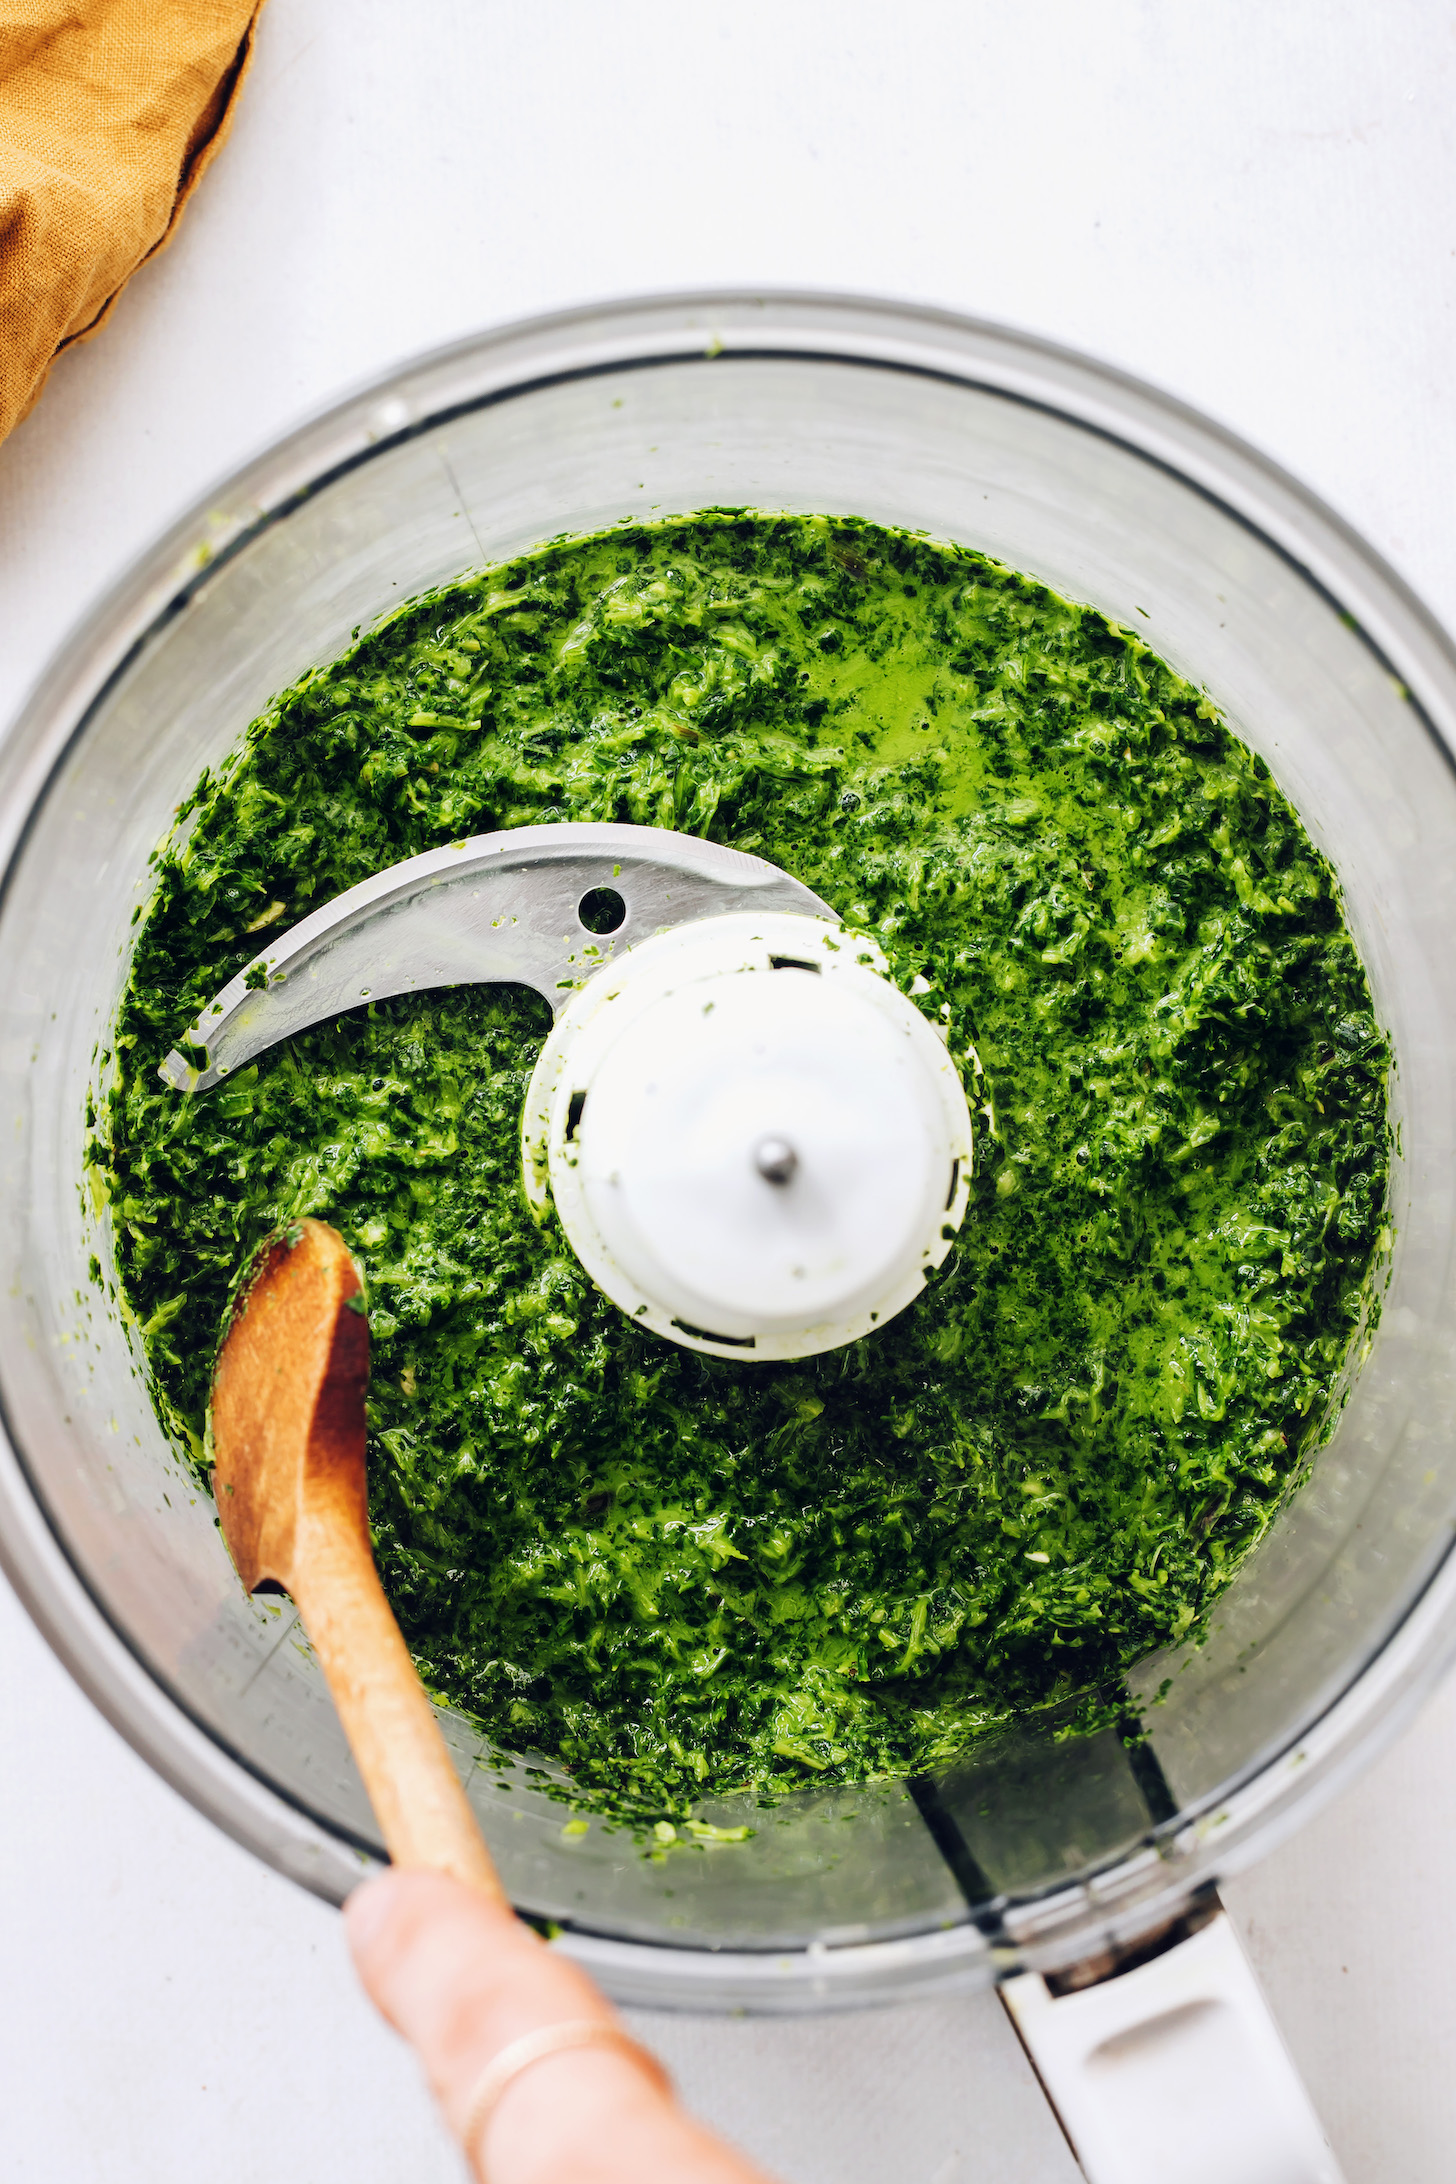 Holding a wooden spoon over a food processor of mint chutney